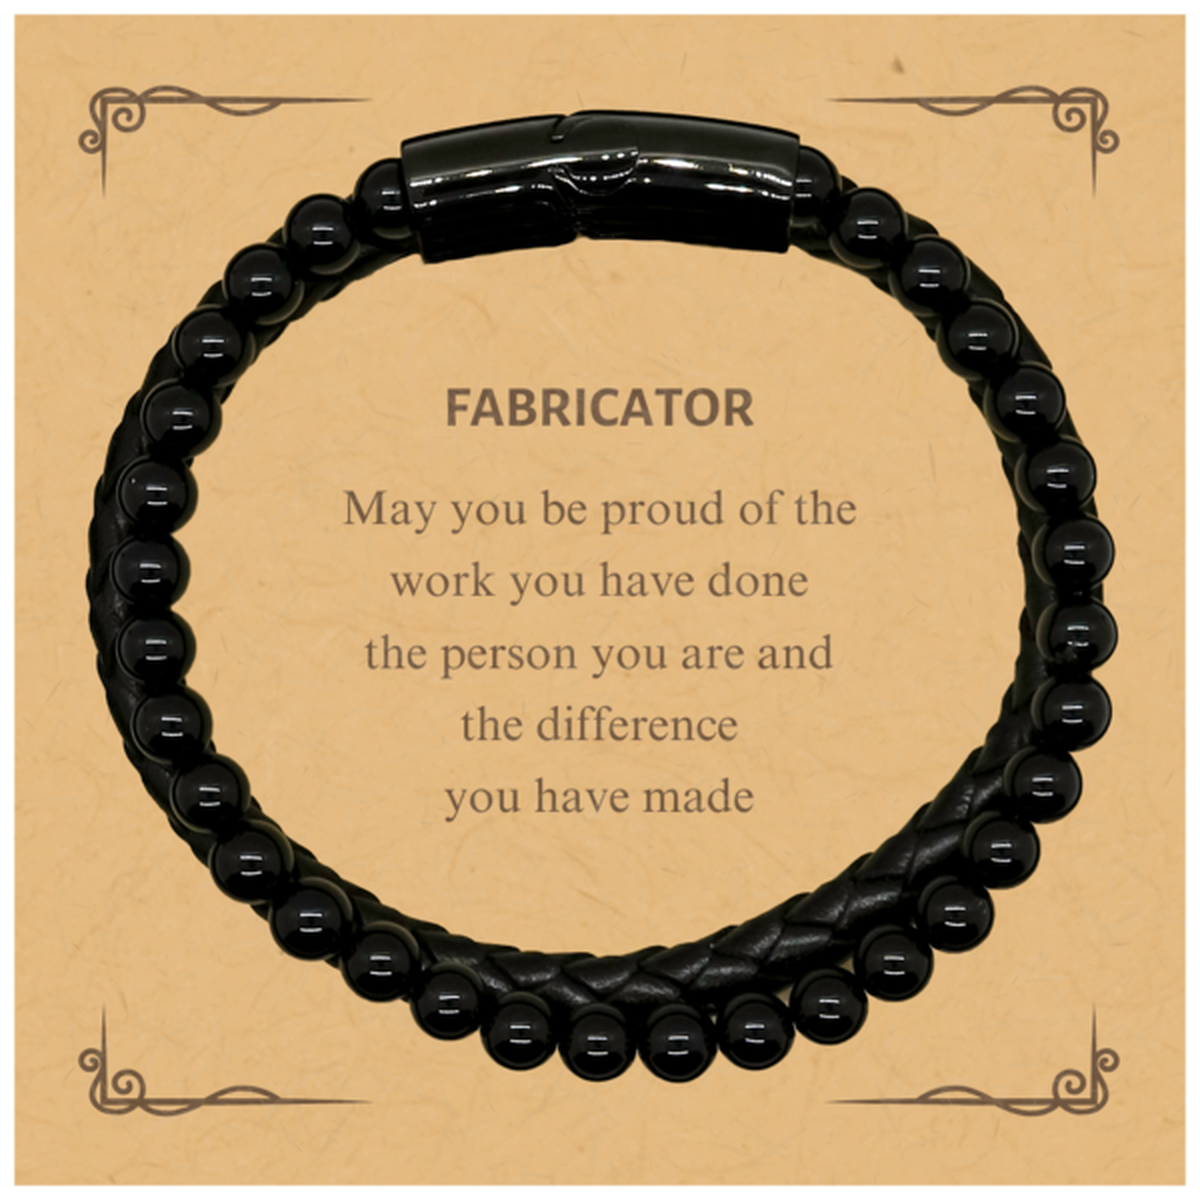 Fabricator May you be proud of the work you have done, Retirement Fabricator Stone Leather Bracelets for Colleague Appreciation Gifts Amazing for Fabricator